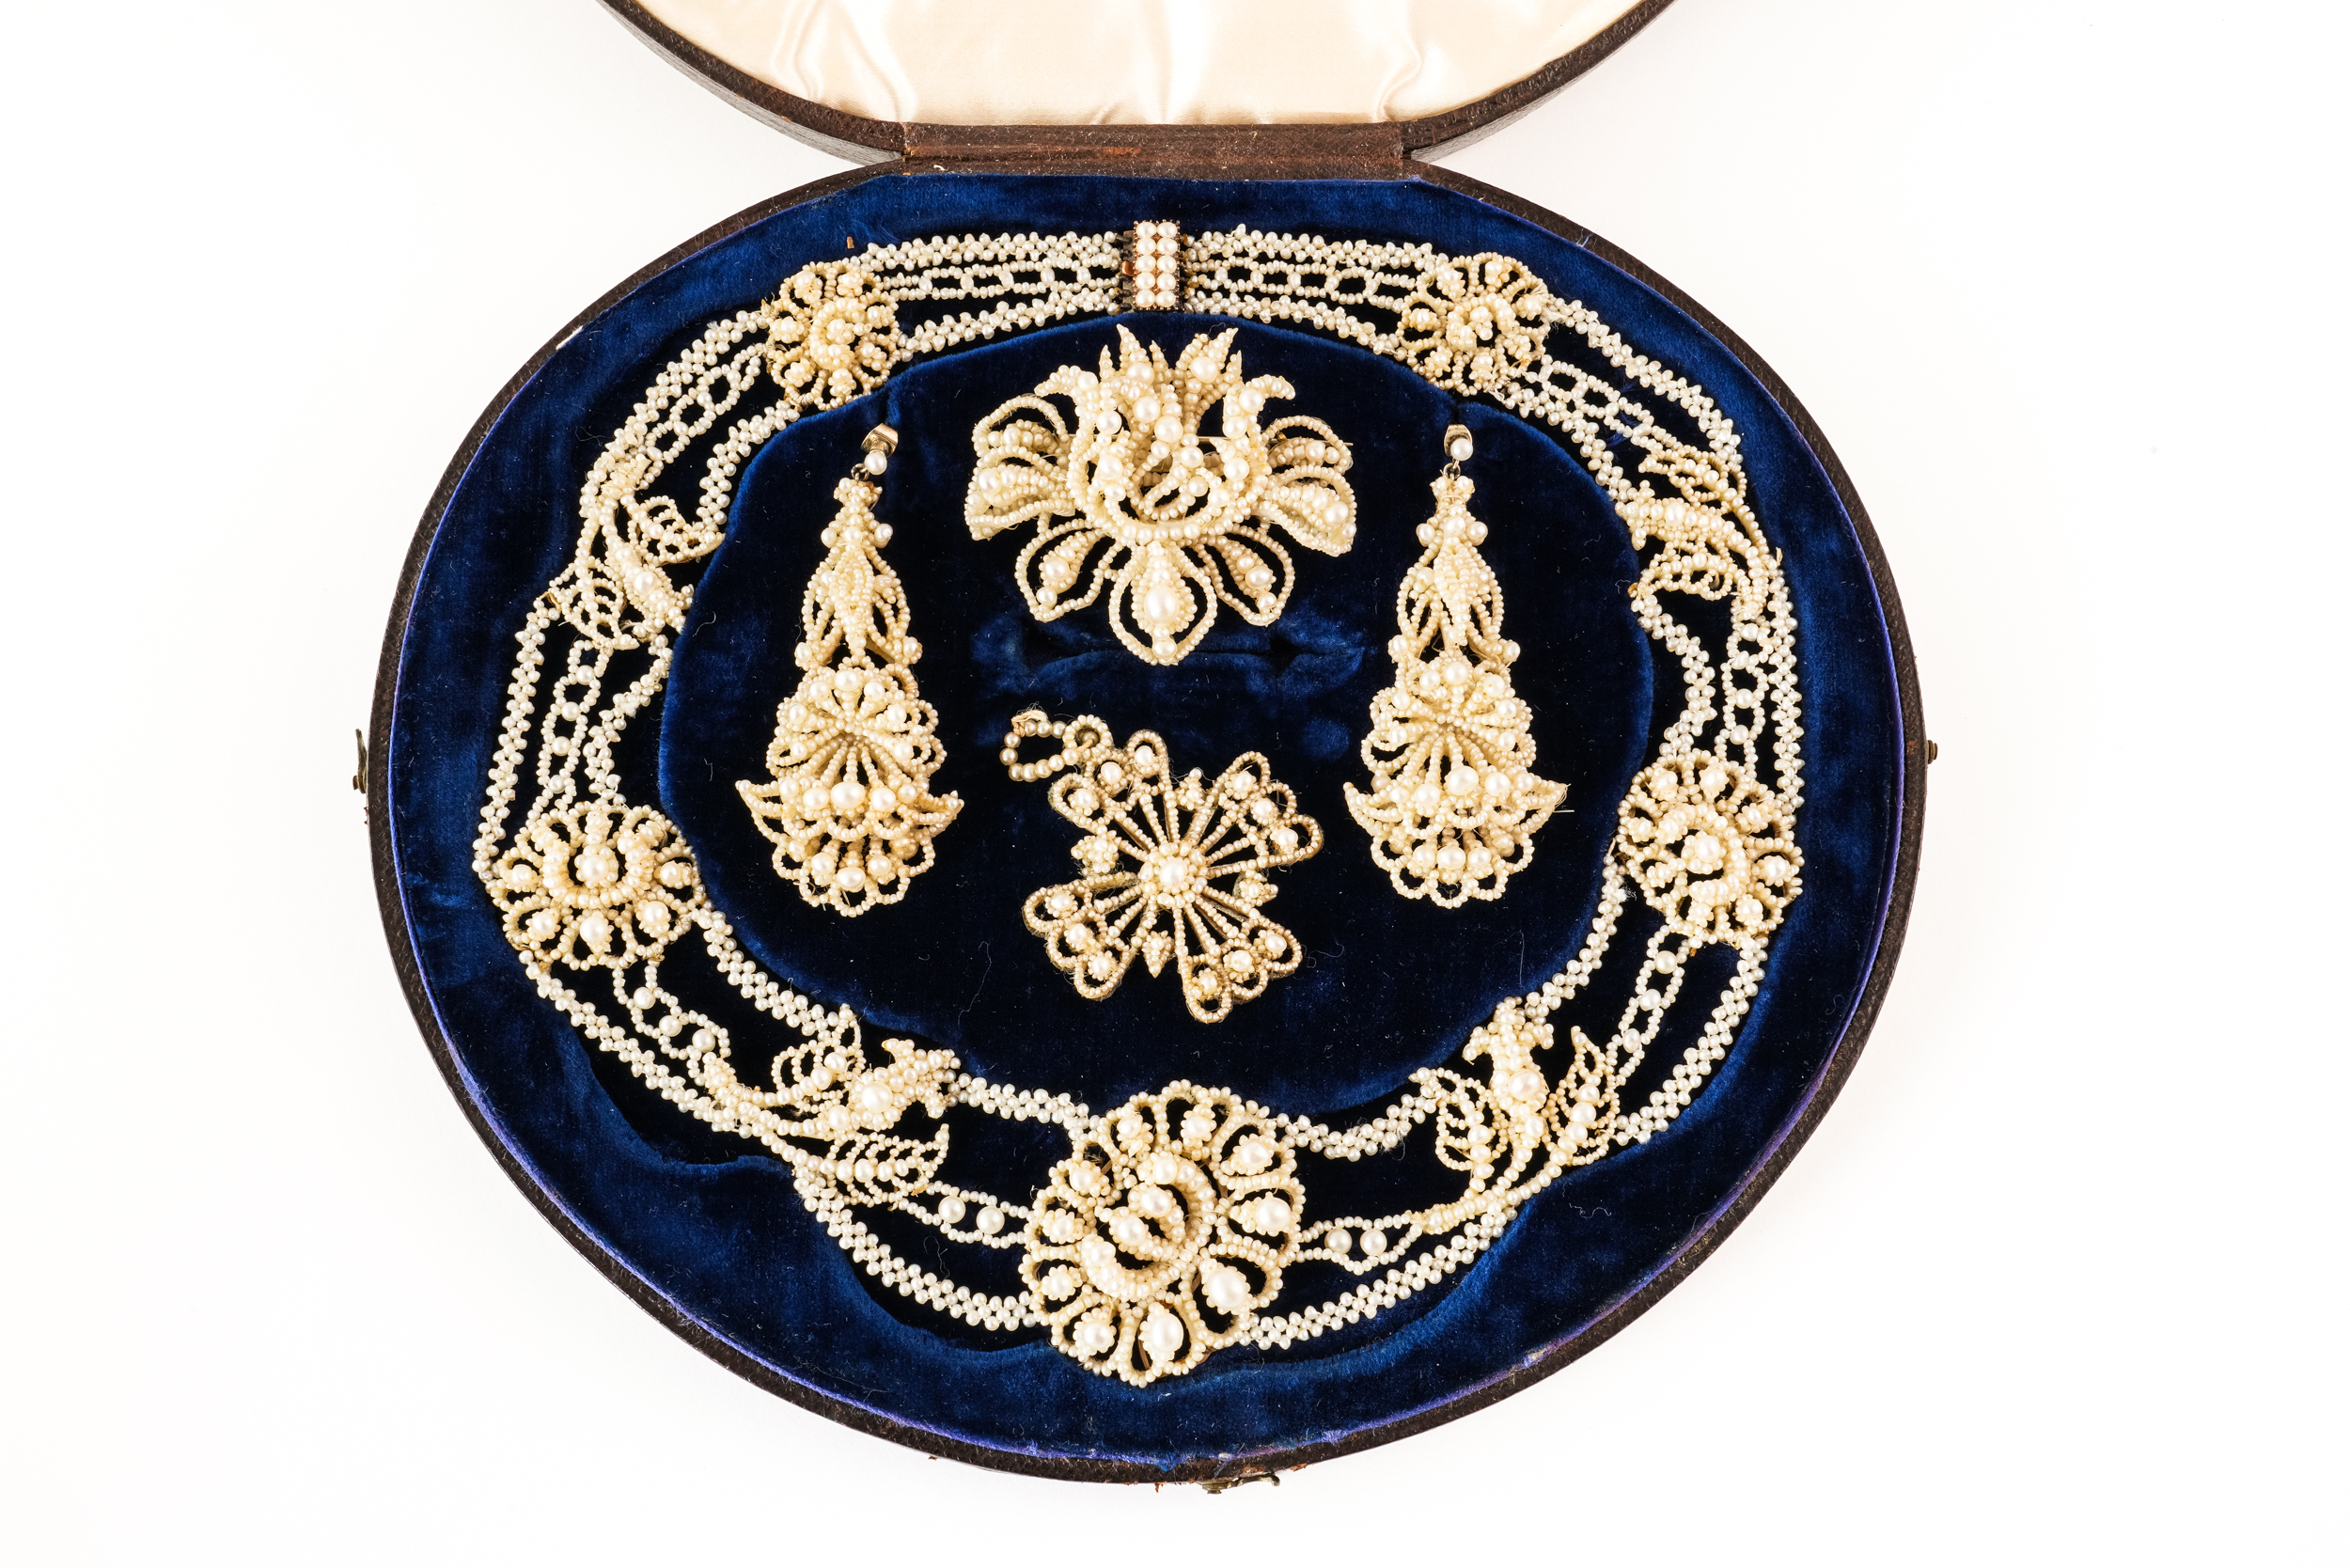 A MID 19TH CENTURY SUITE OF SEED PEARL JEWELLERY